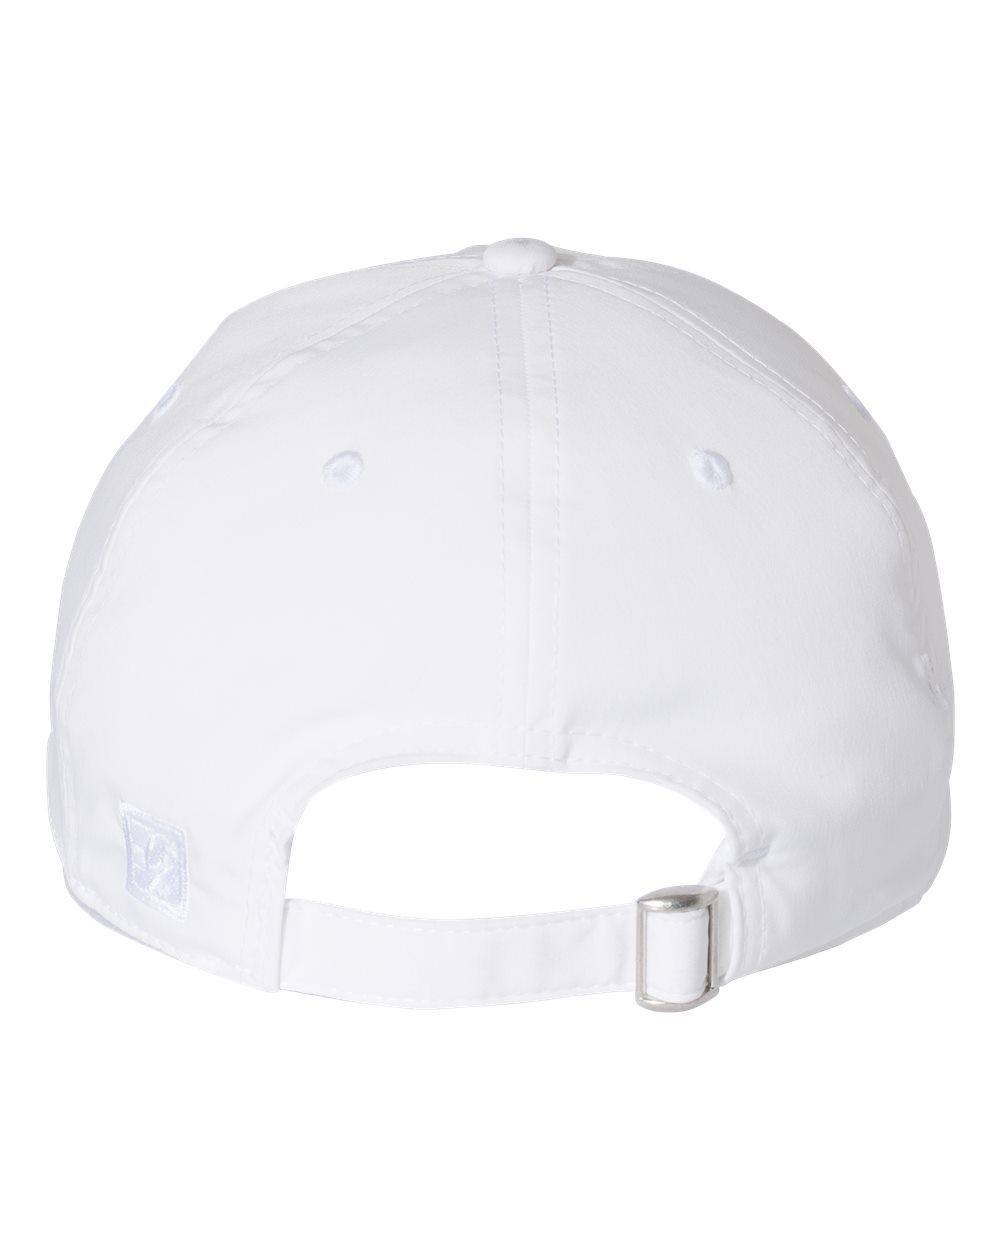 Relaxed Gamechanger Cap - GB415-The Game